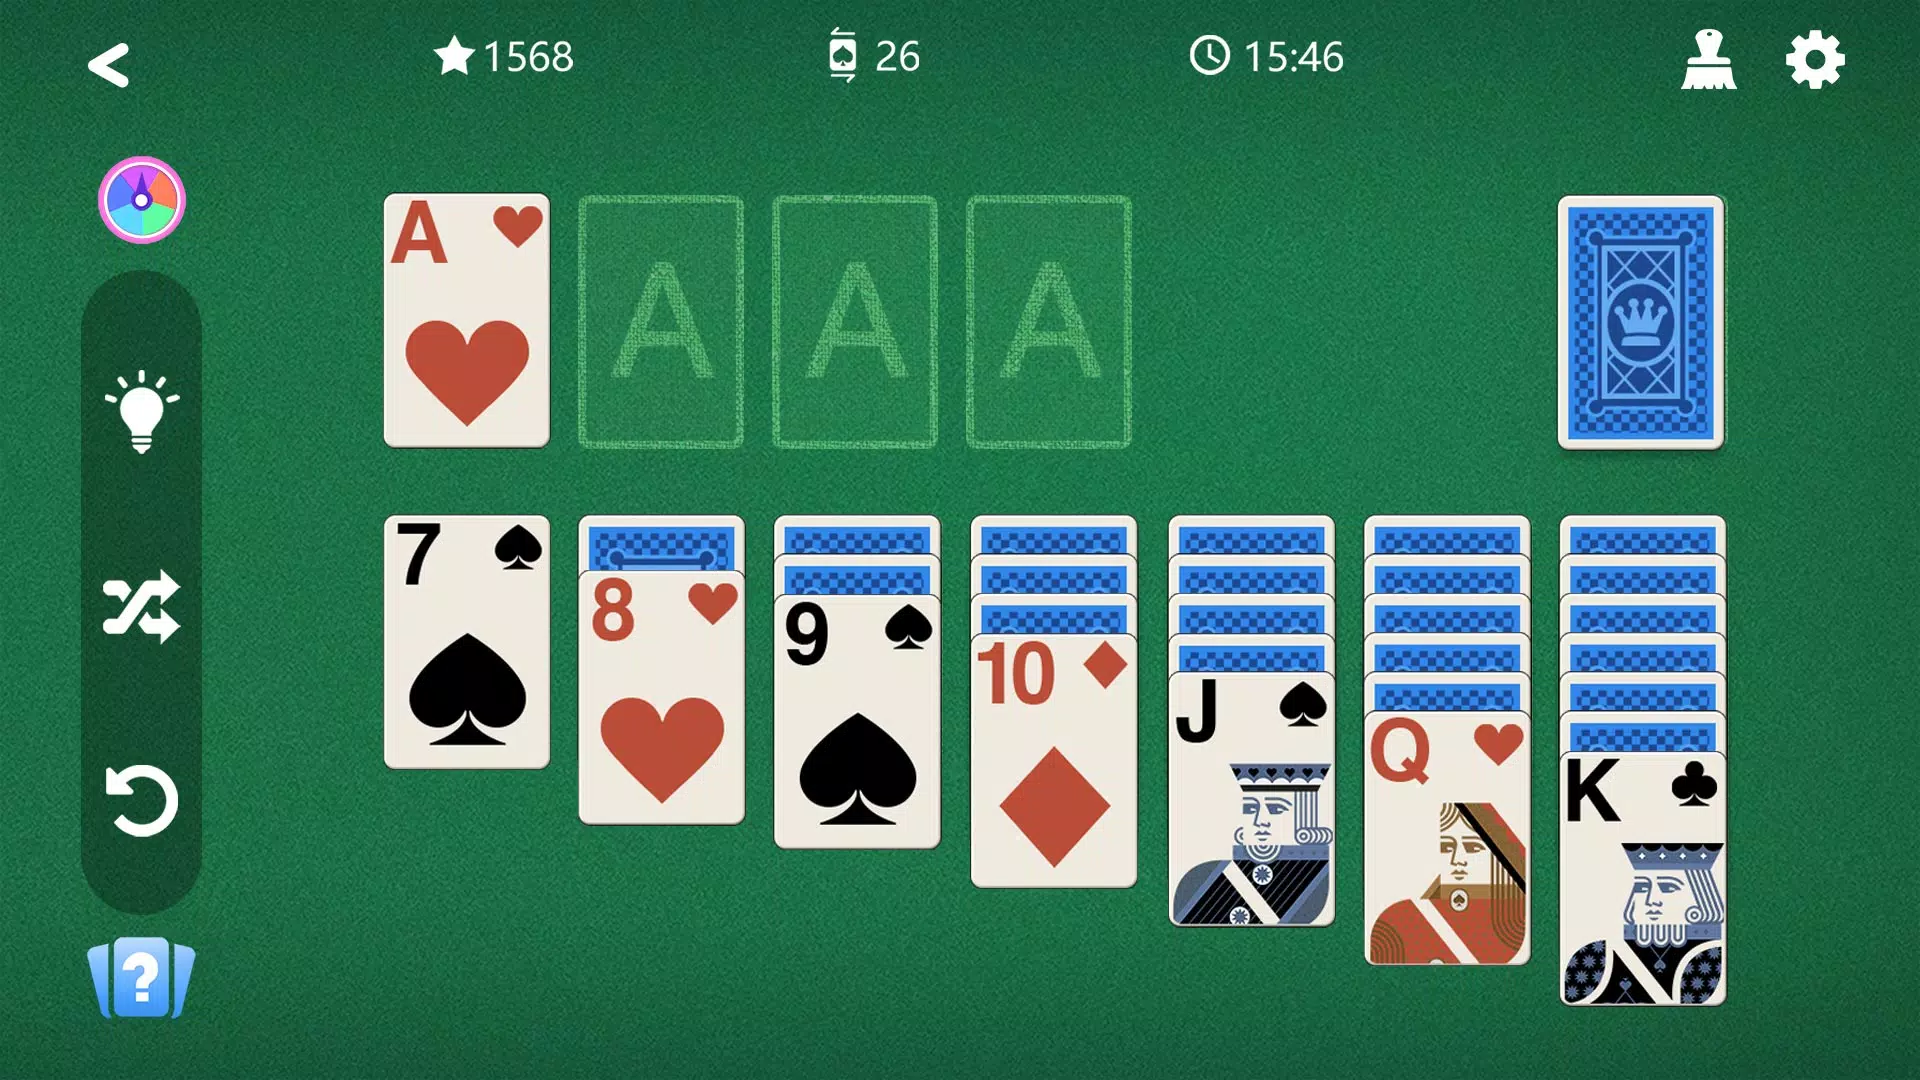 All Solitaire card games online -- www.solitairemania.com